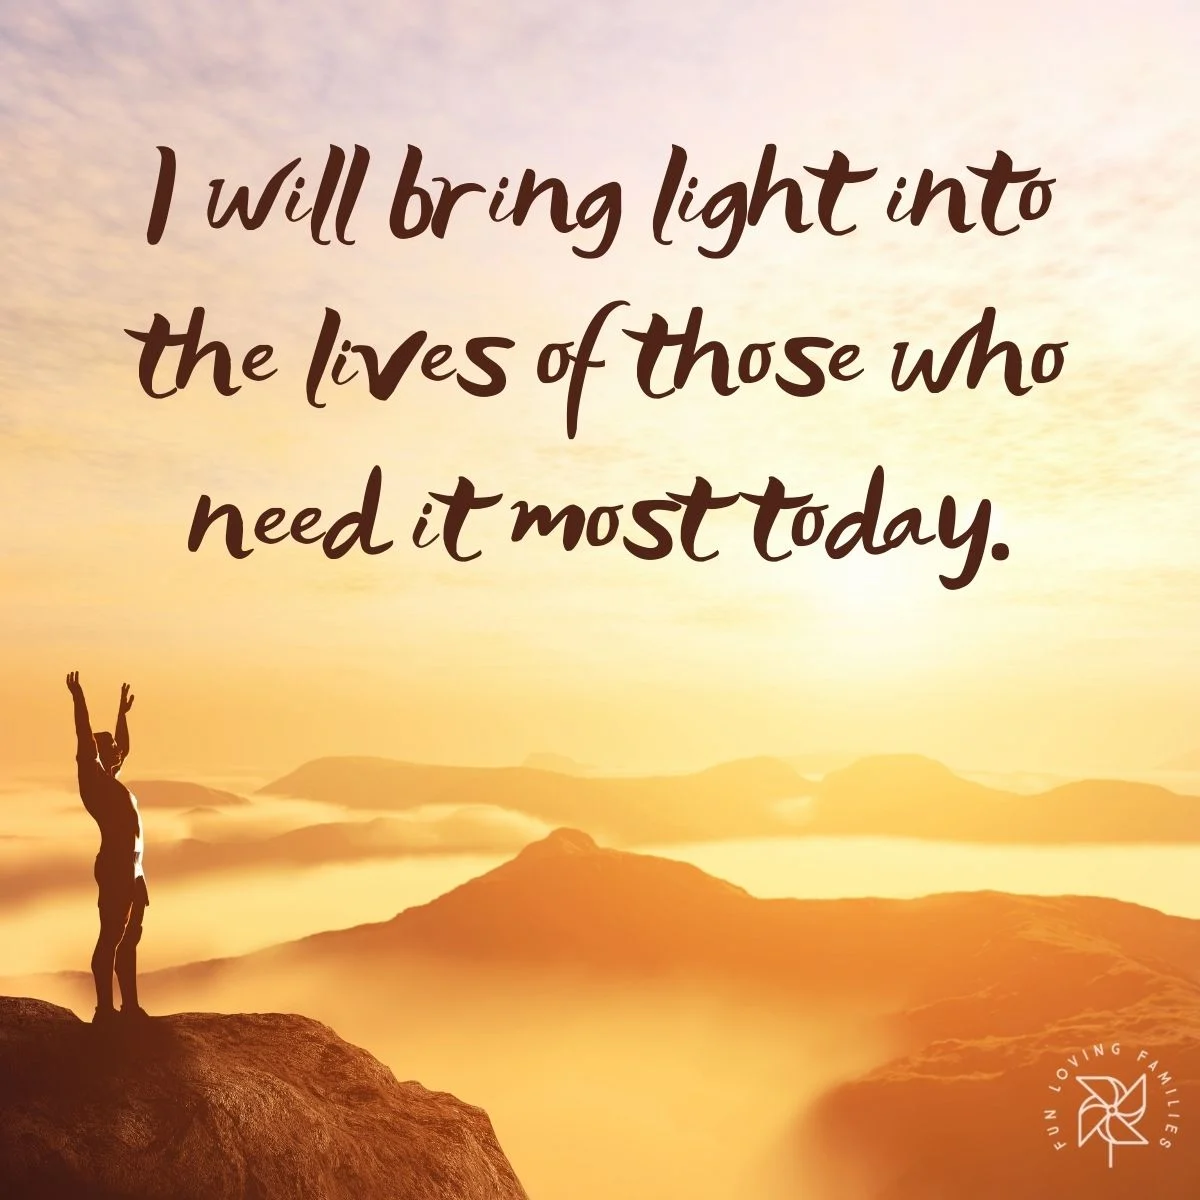 I will bring light into the lives of those who need it most today affirmation image